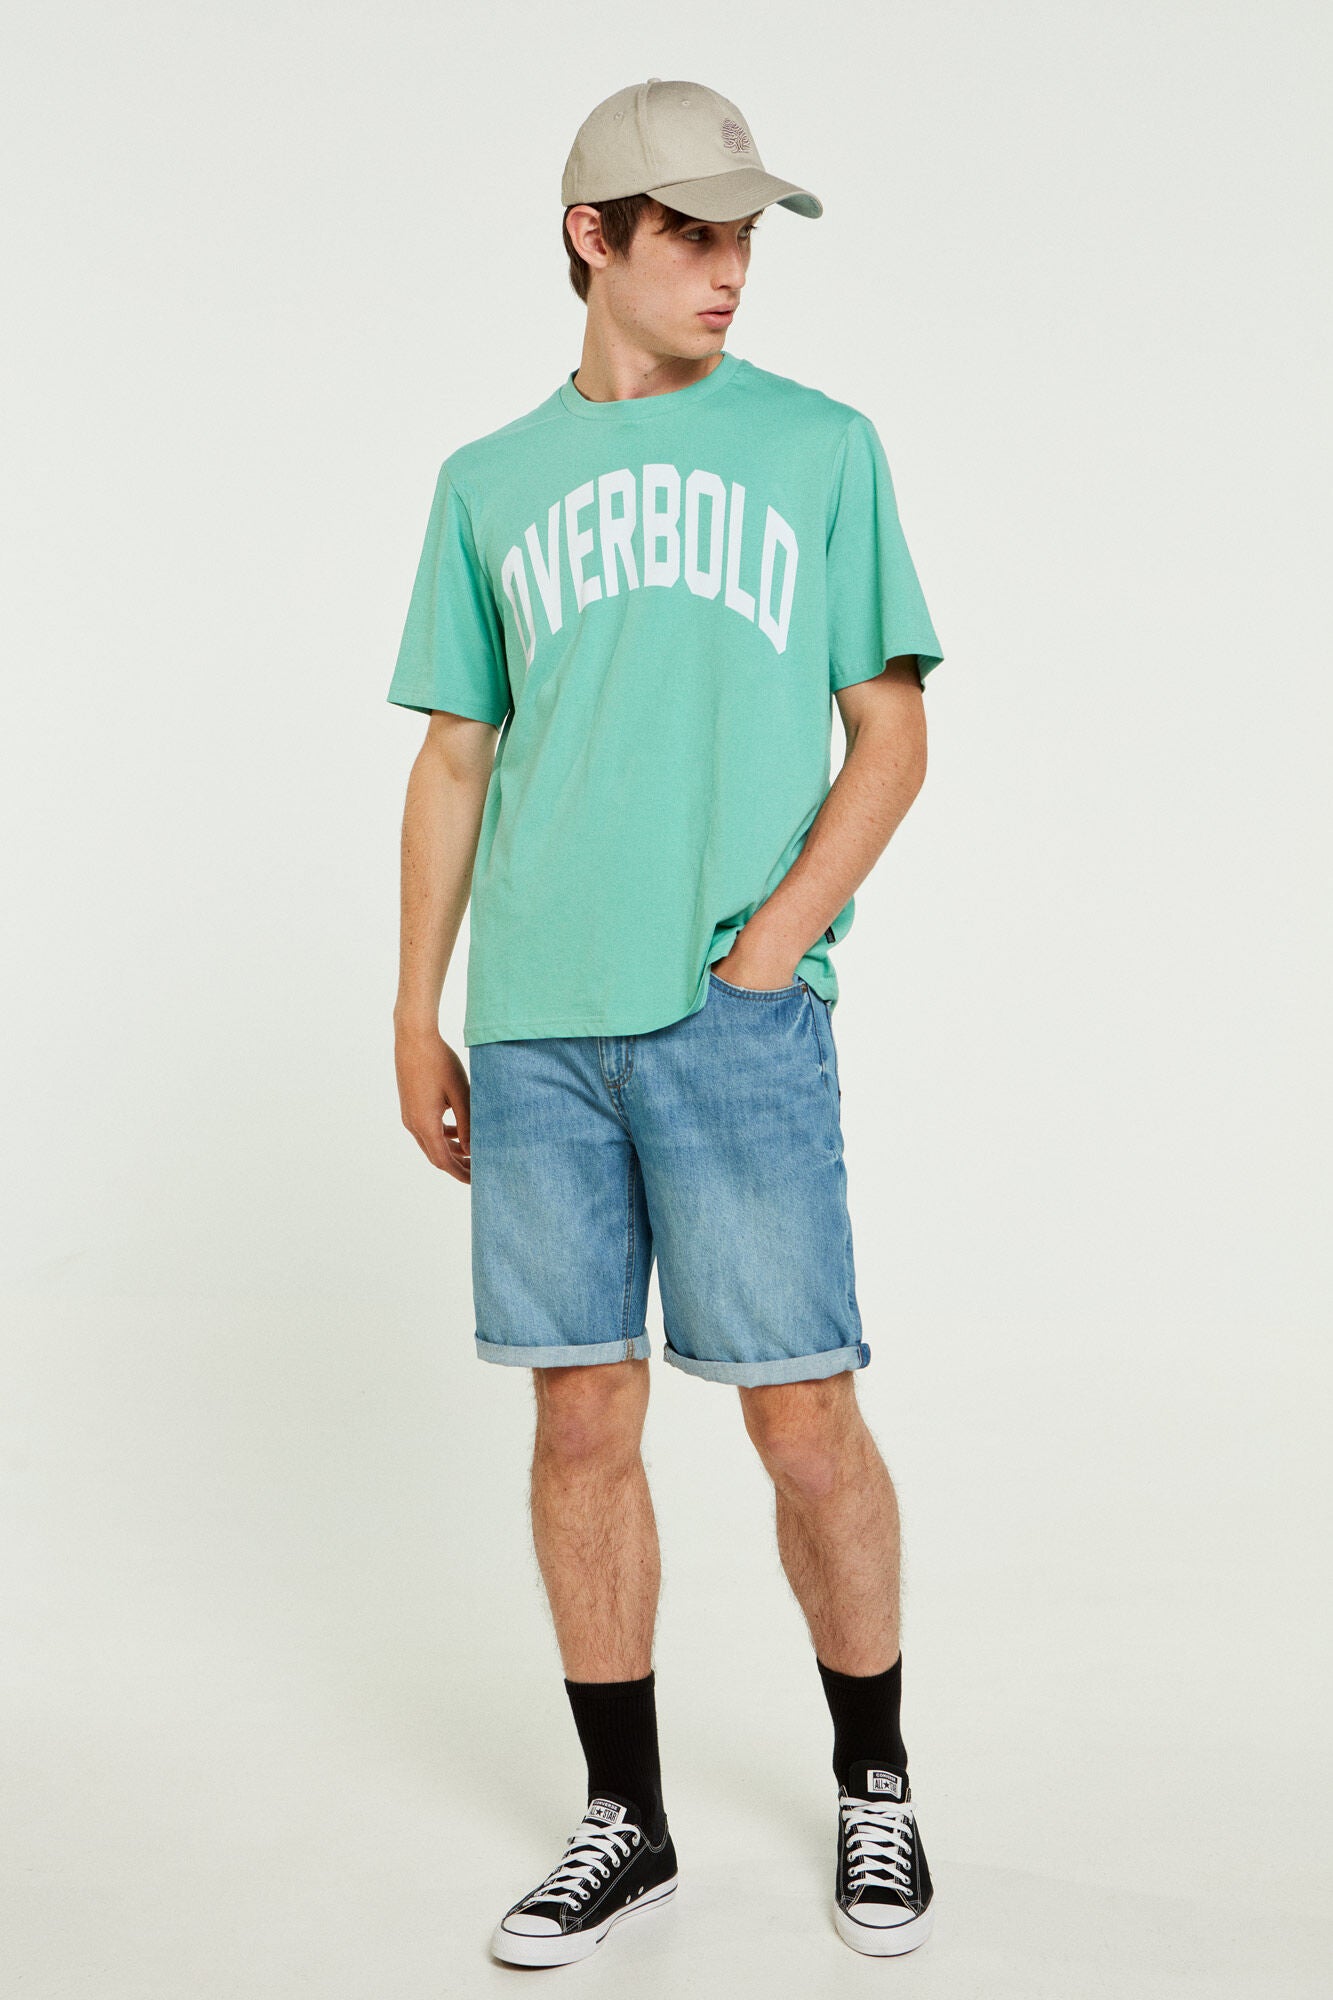 Mint Blue Overbold Printed T-shirt